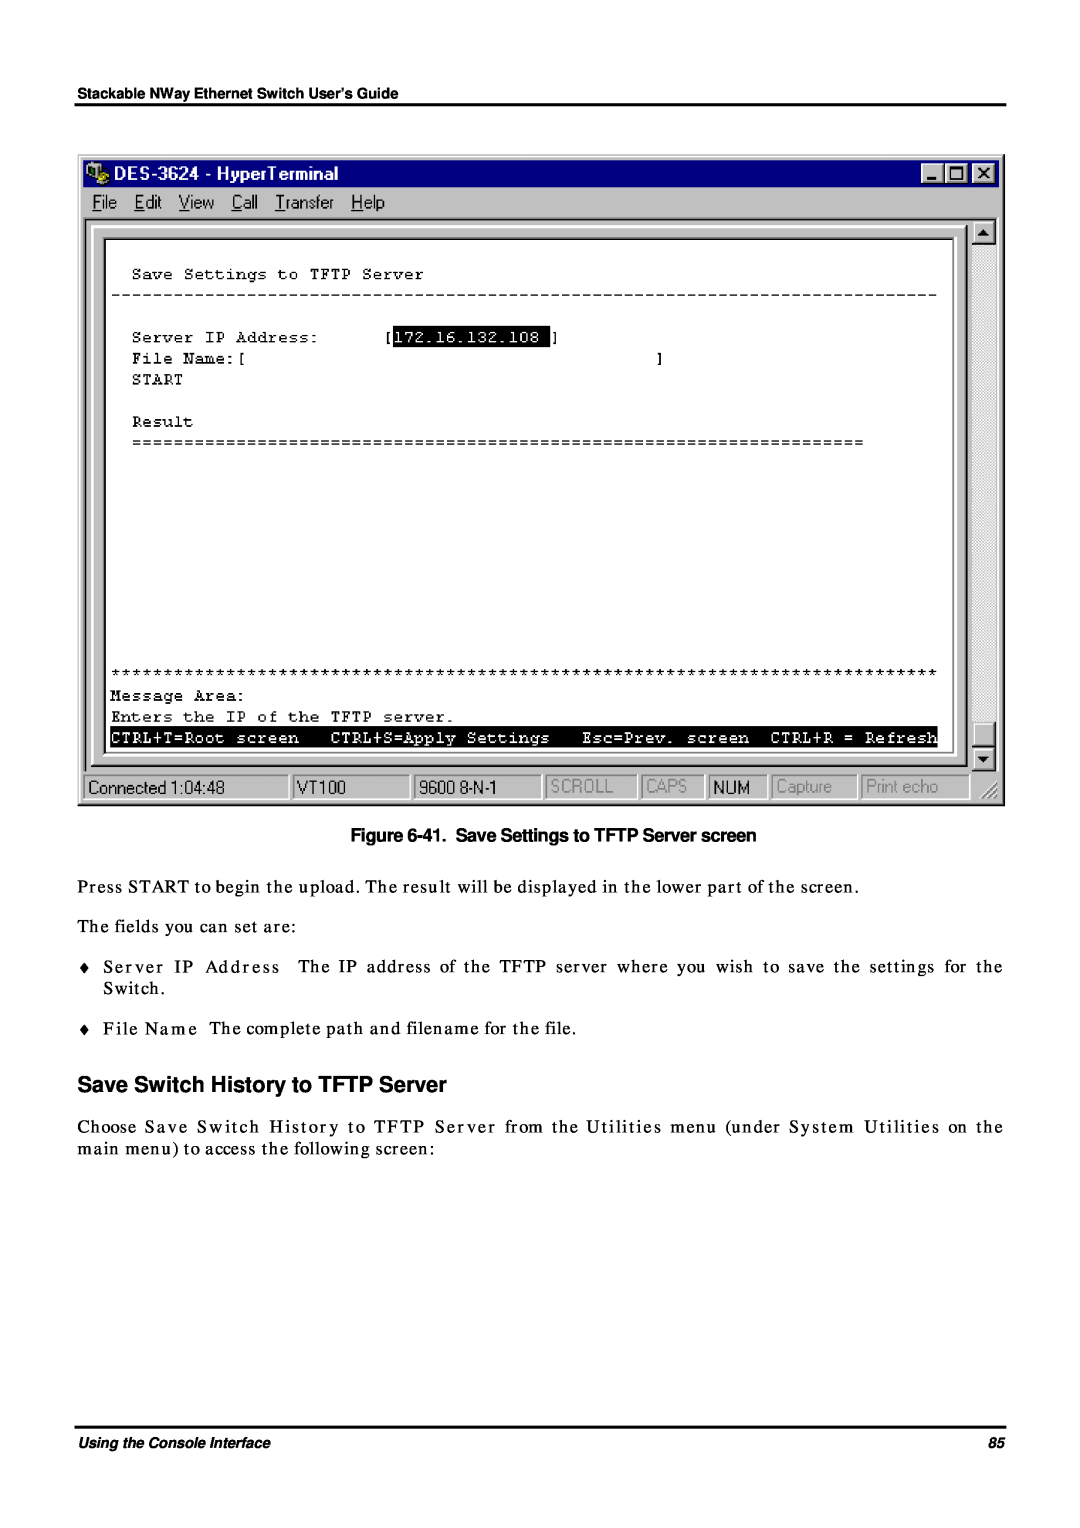 D-Link DES-3624 manual Save Switch History to TFTP Server, 41. Save Settings to TFTP Server screen 